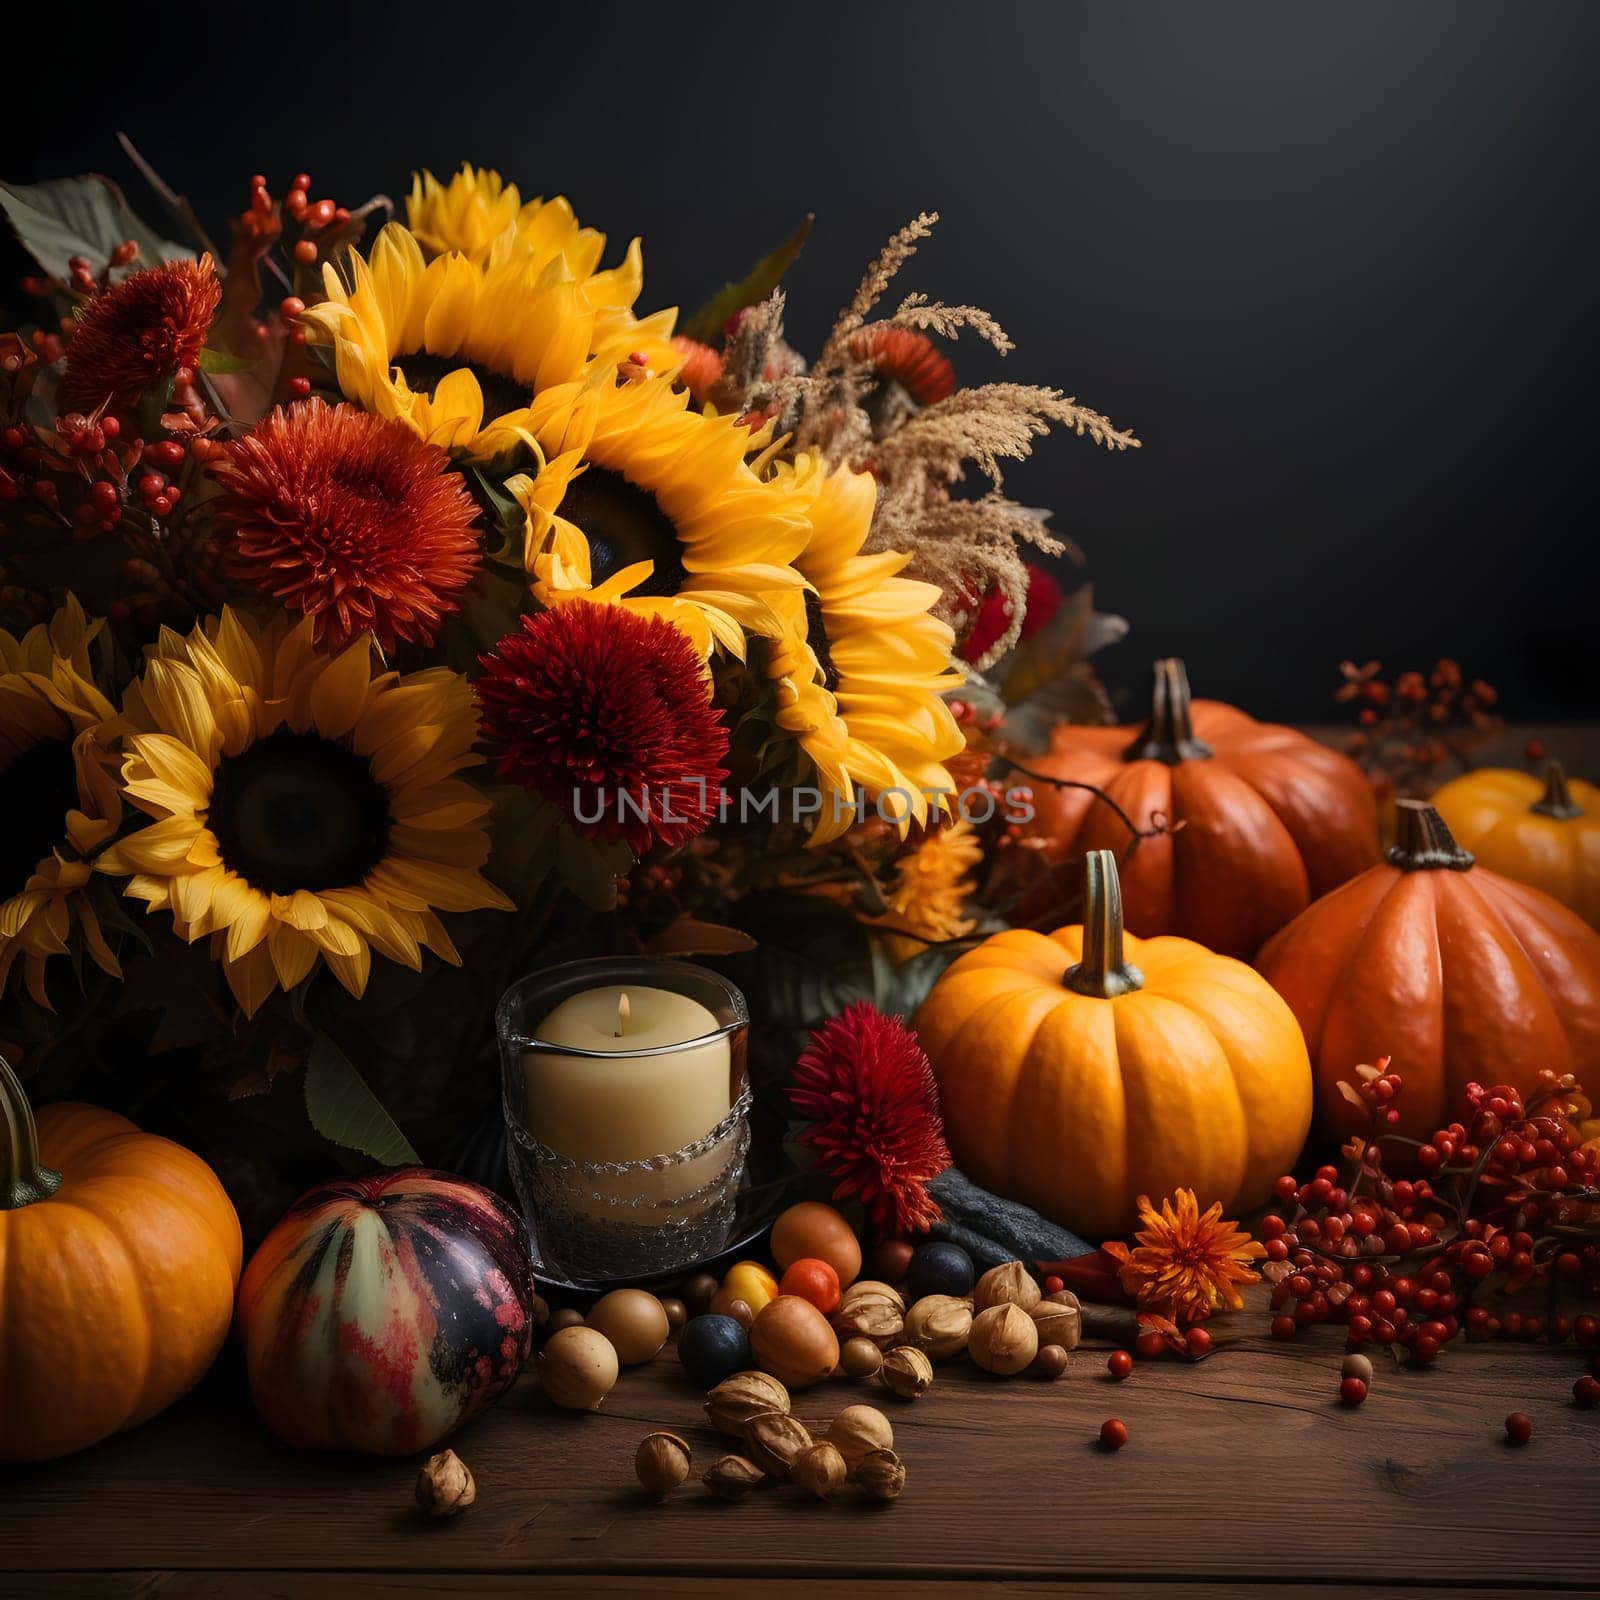 Sunflowers, pumpkins, rowan, vegetables. Harvest from the field on a dark board wooden background. Pumpkin as a dish of thanksgiving for the harvest. by ThemesS